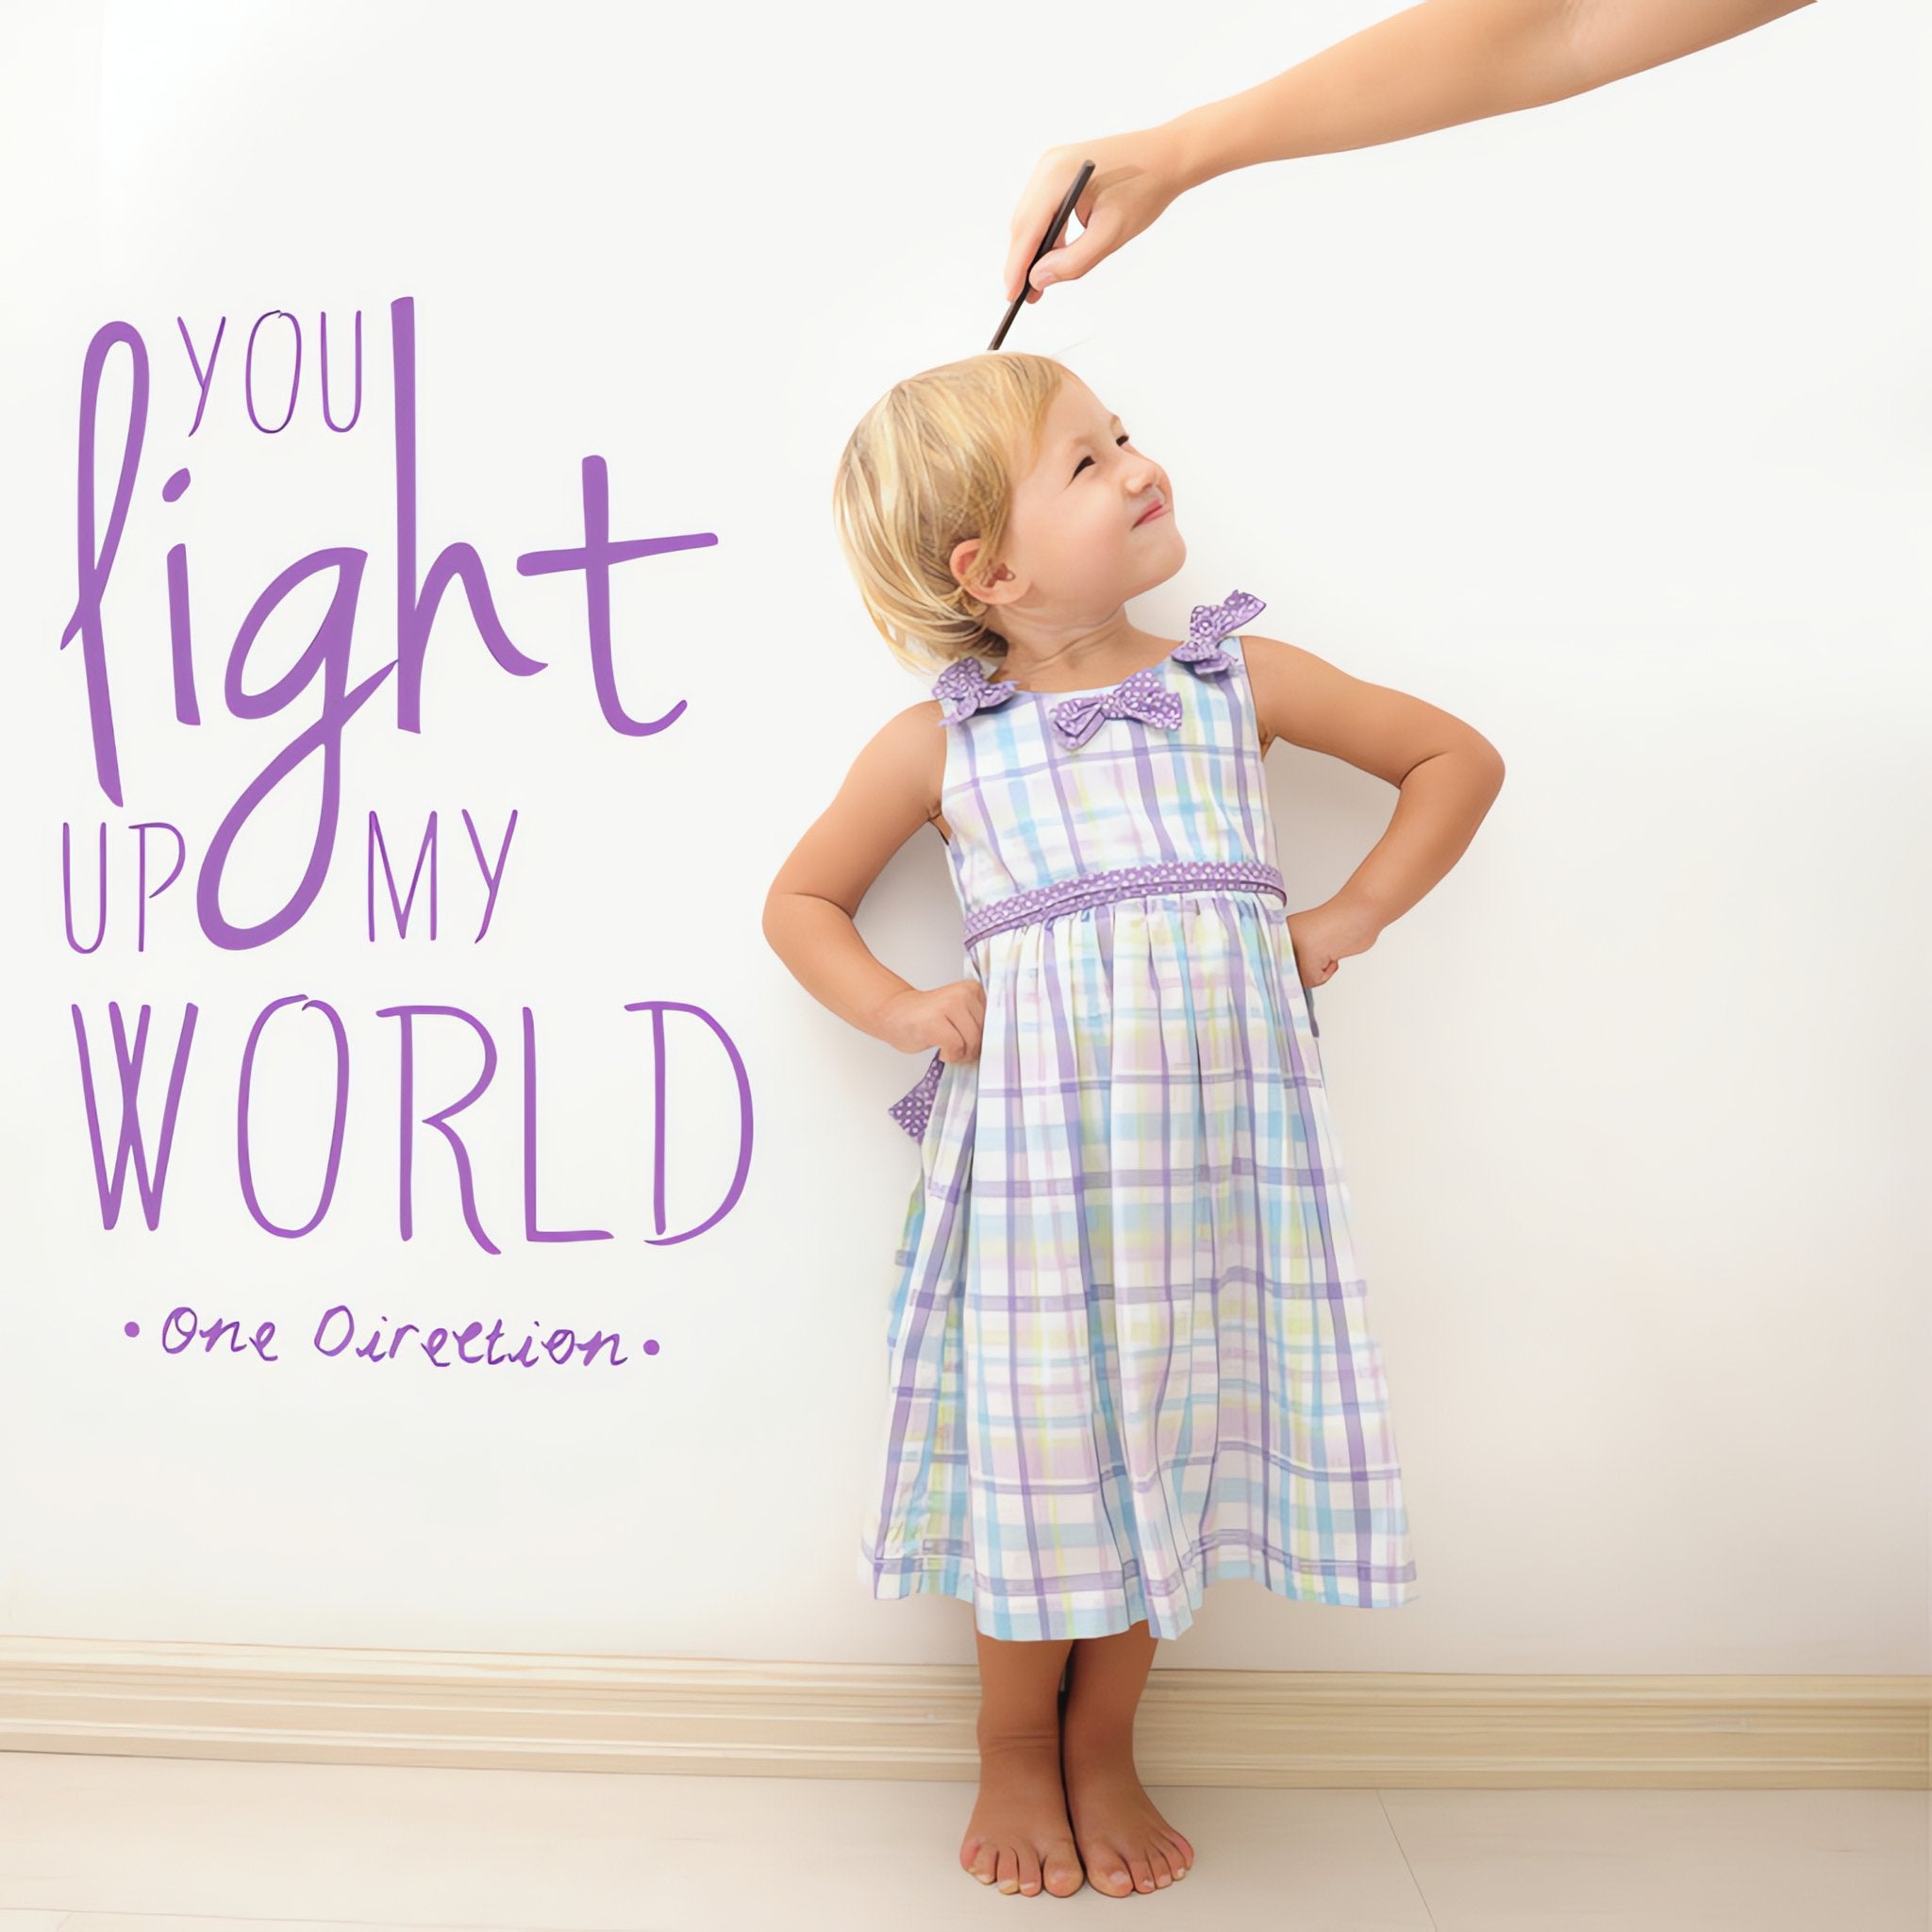 Wall quote sticker with text "You Light Up My World" by One Direction next to a happy little girl.